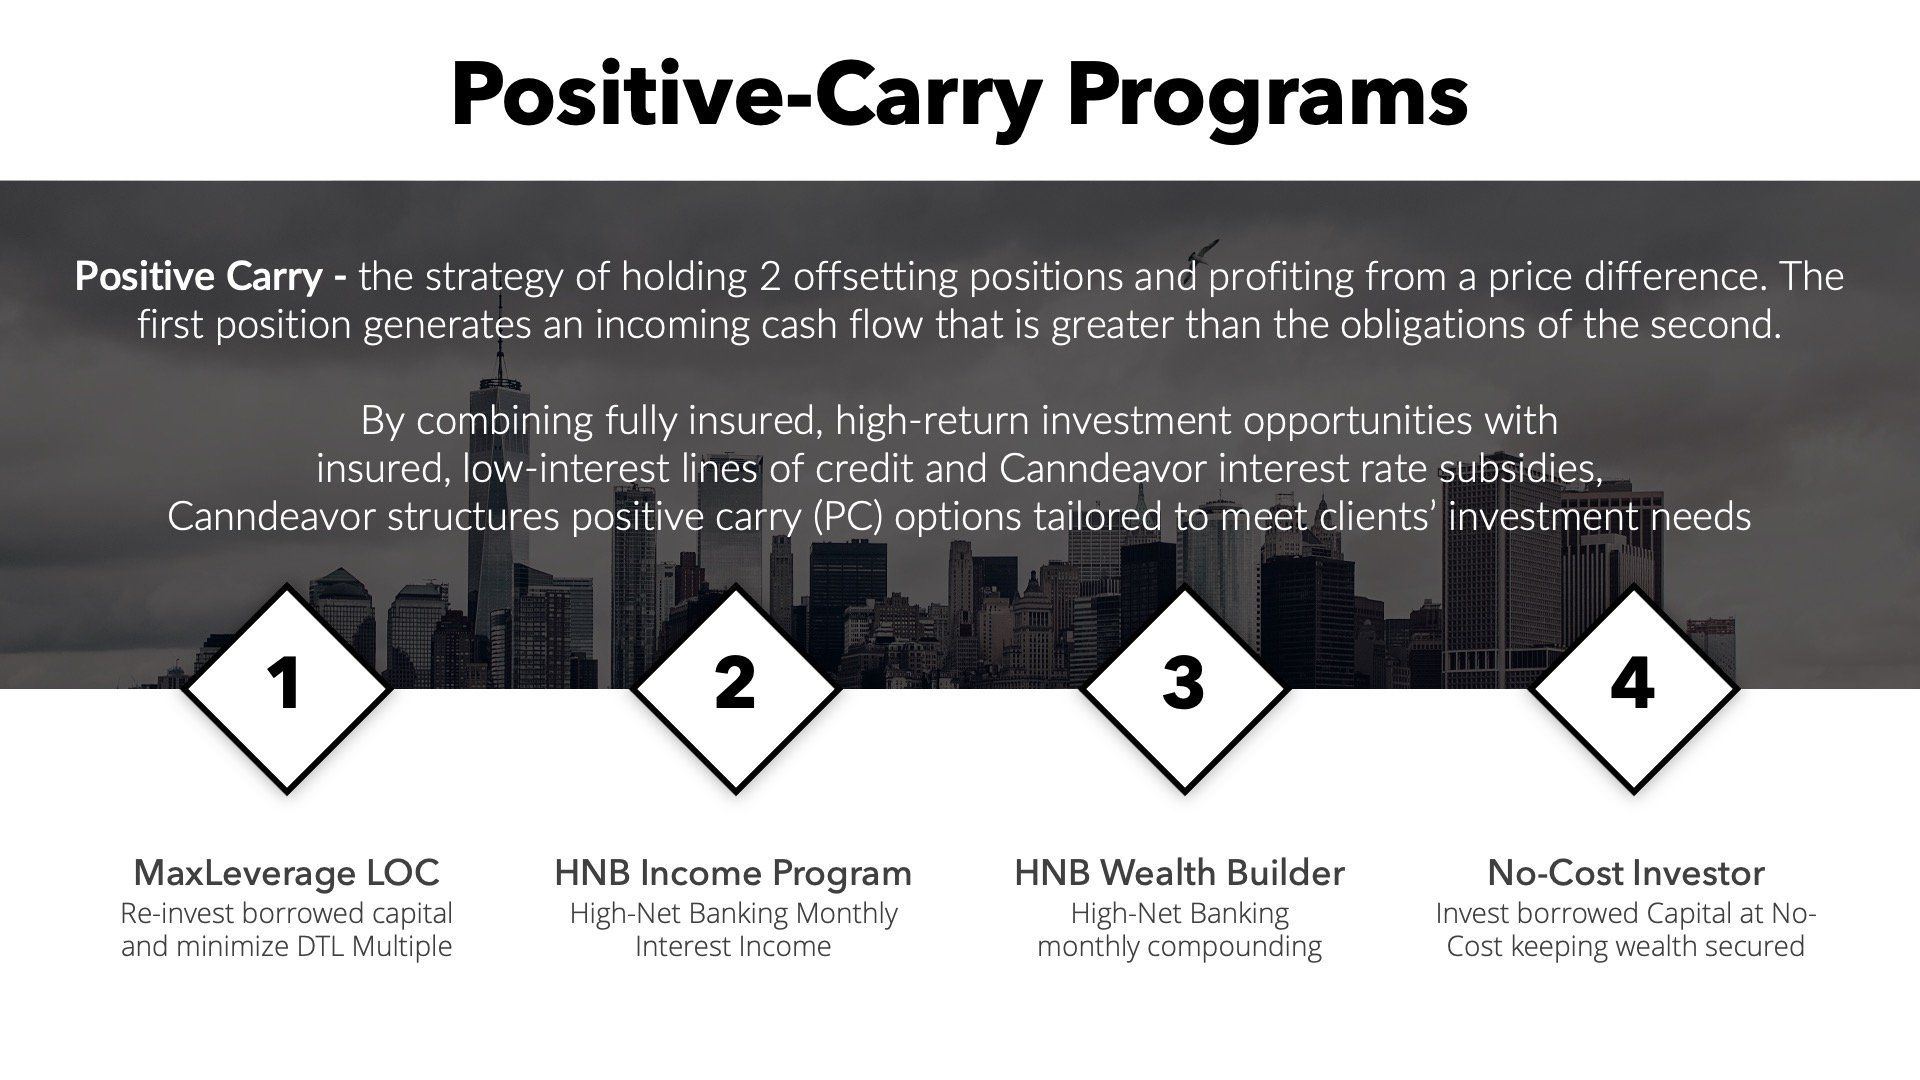 a poster for positive carry programs with a city skyline in the background .